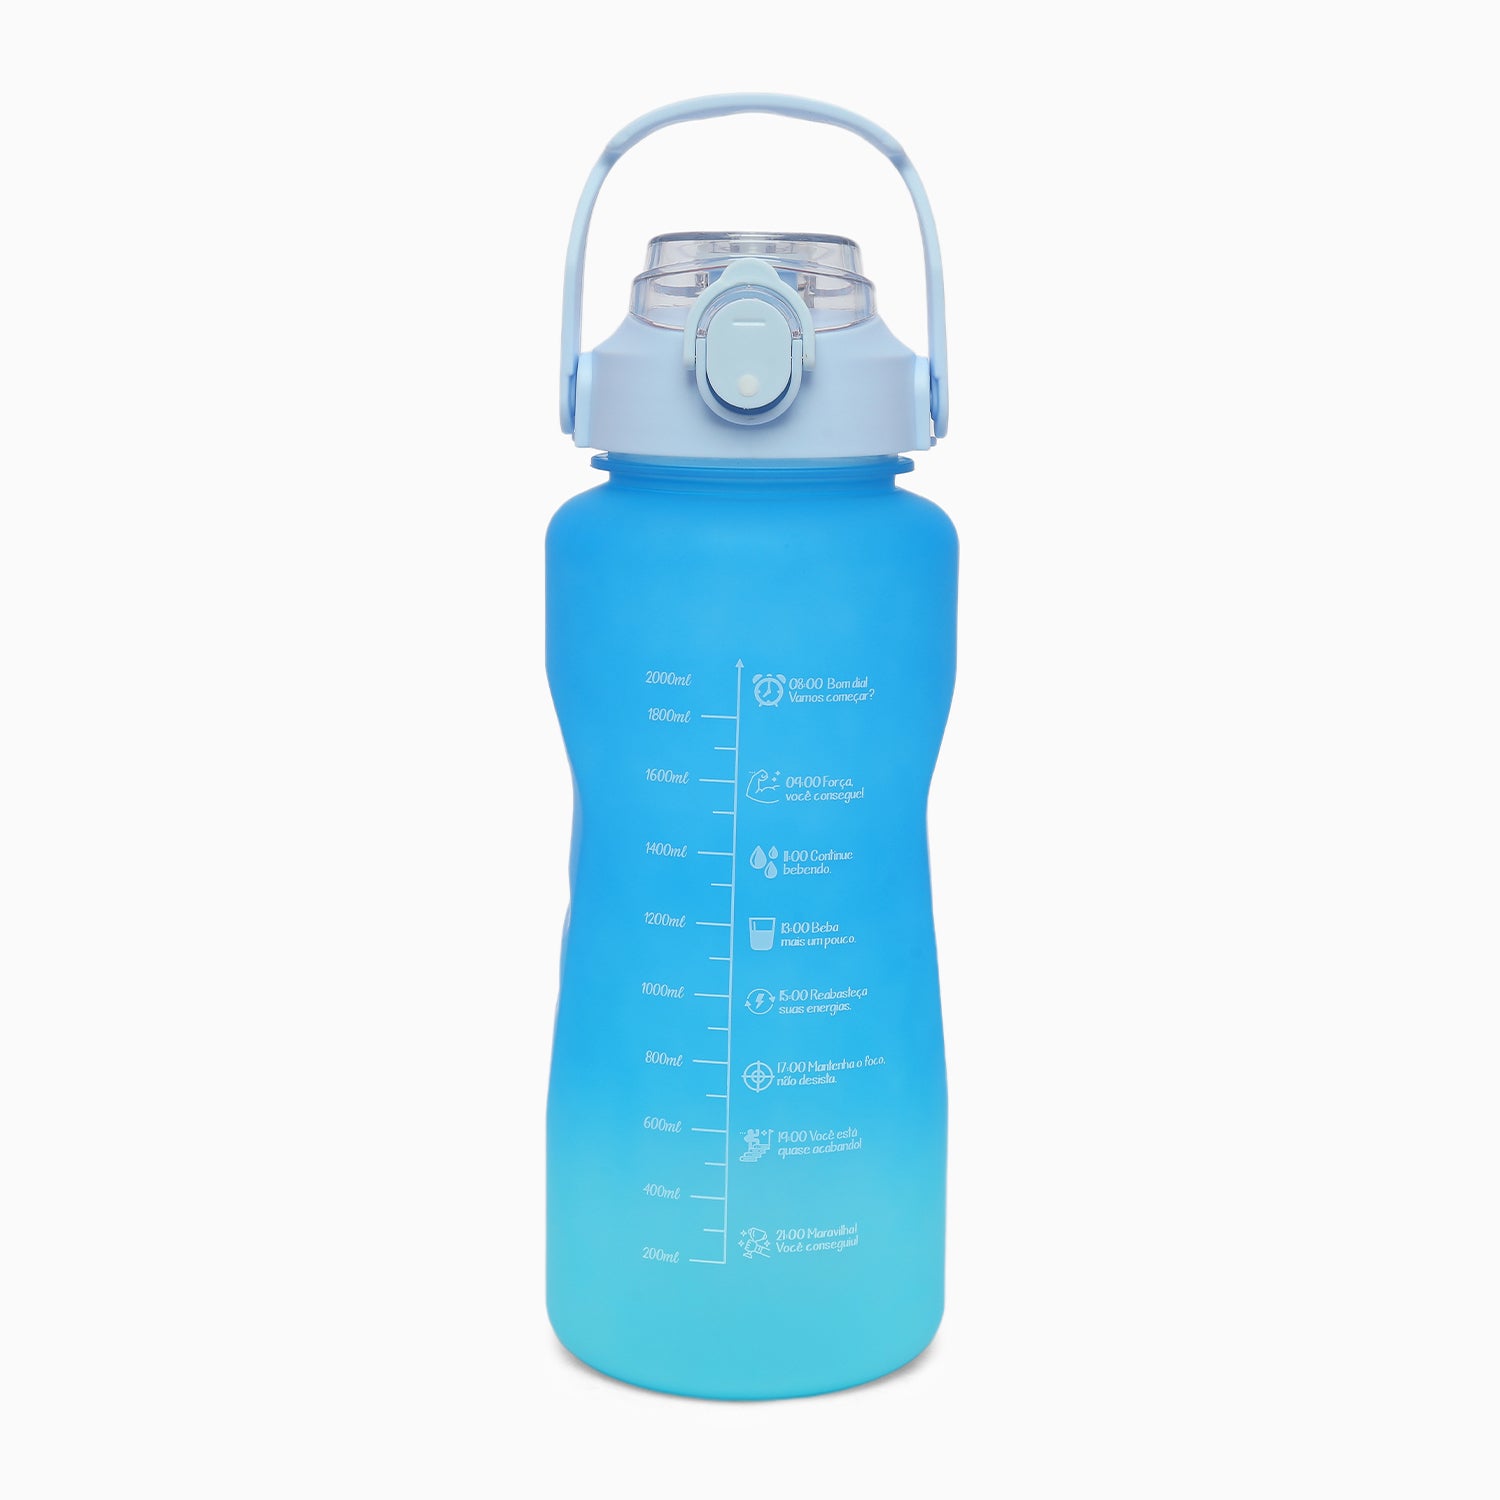 Motivational Water Bottle with Straw 3 Pcs, 2000ml 900ml 300ml Time Marker Large Capacity Cycling Bottle Leakproof Half Gallon 2L Water Jugs Sipper Water bottle for Sports Gym Travel BPA Free with stickers (blue and light blue) - Kidspark